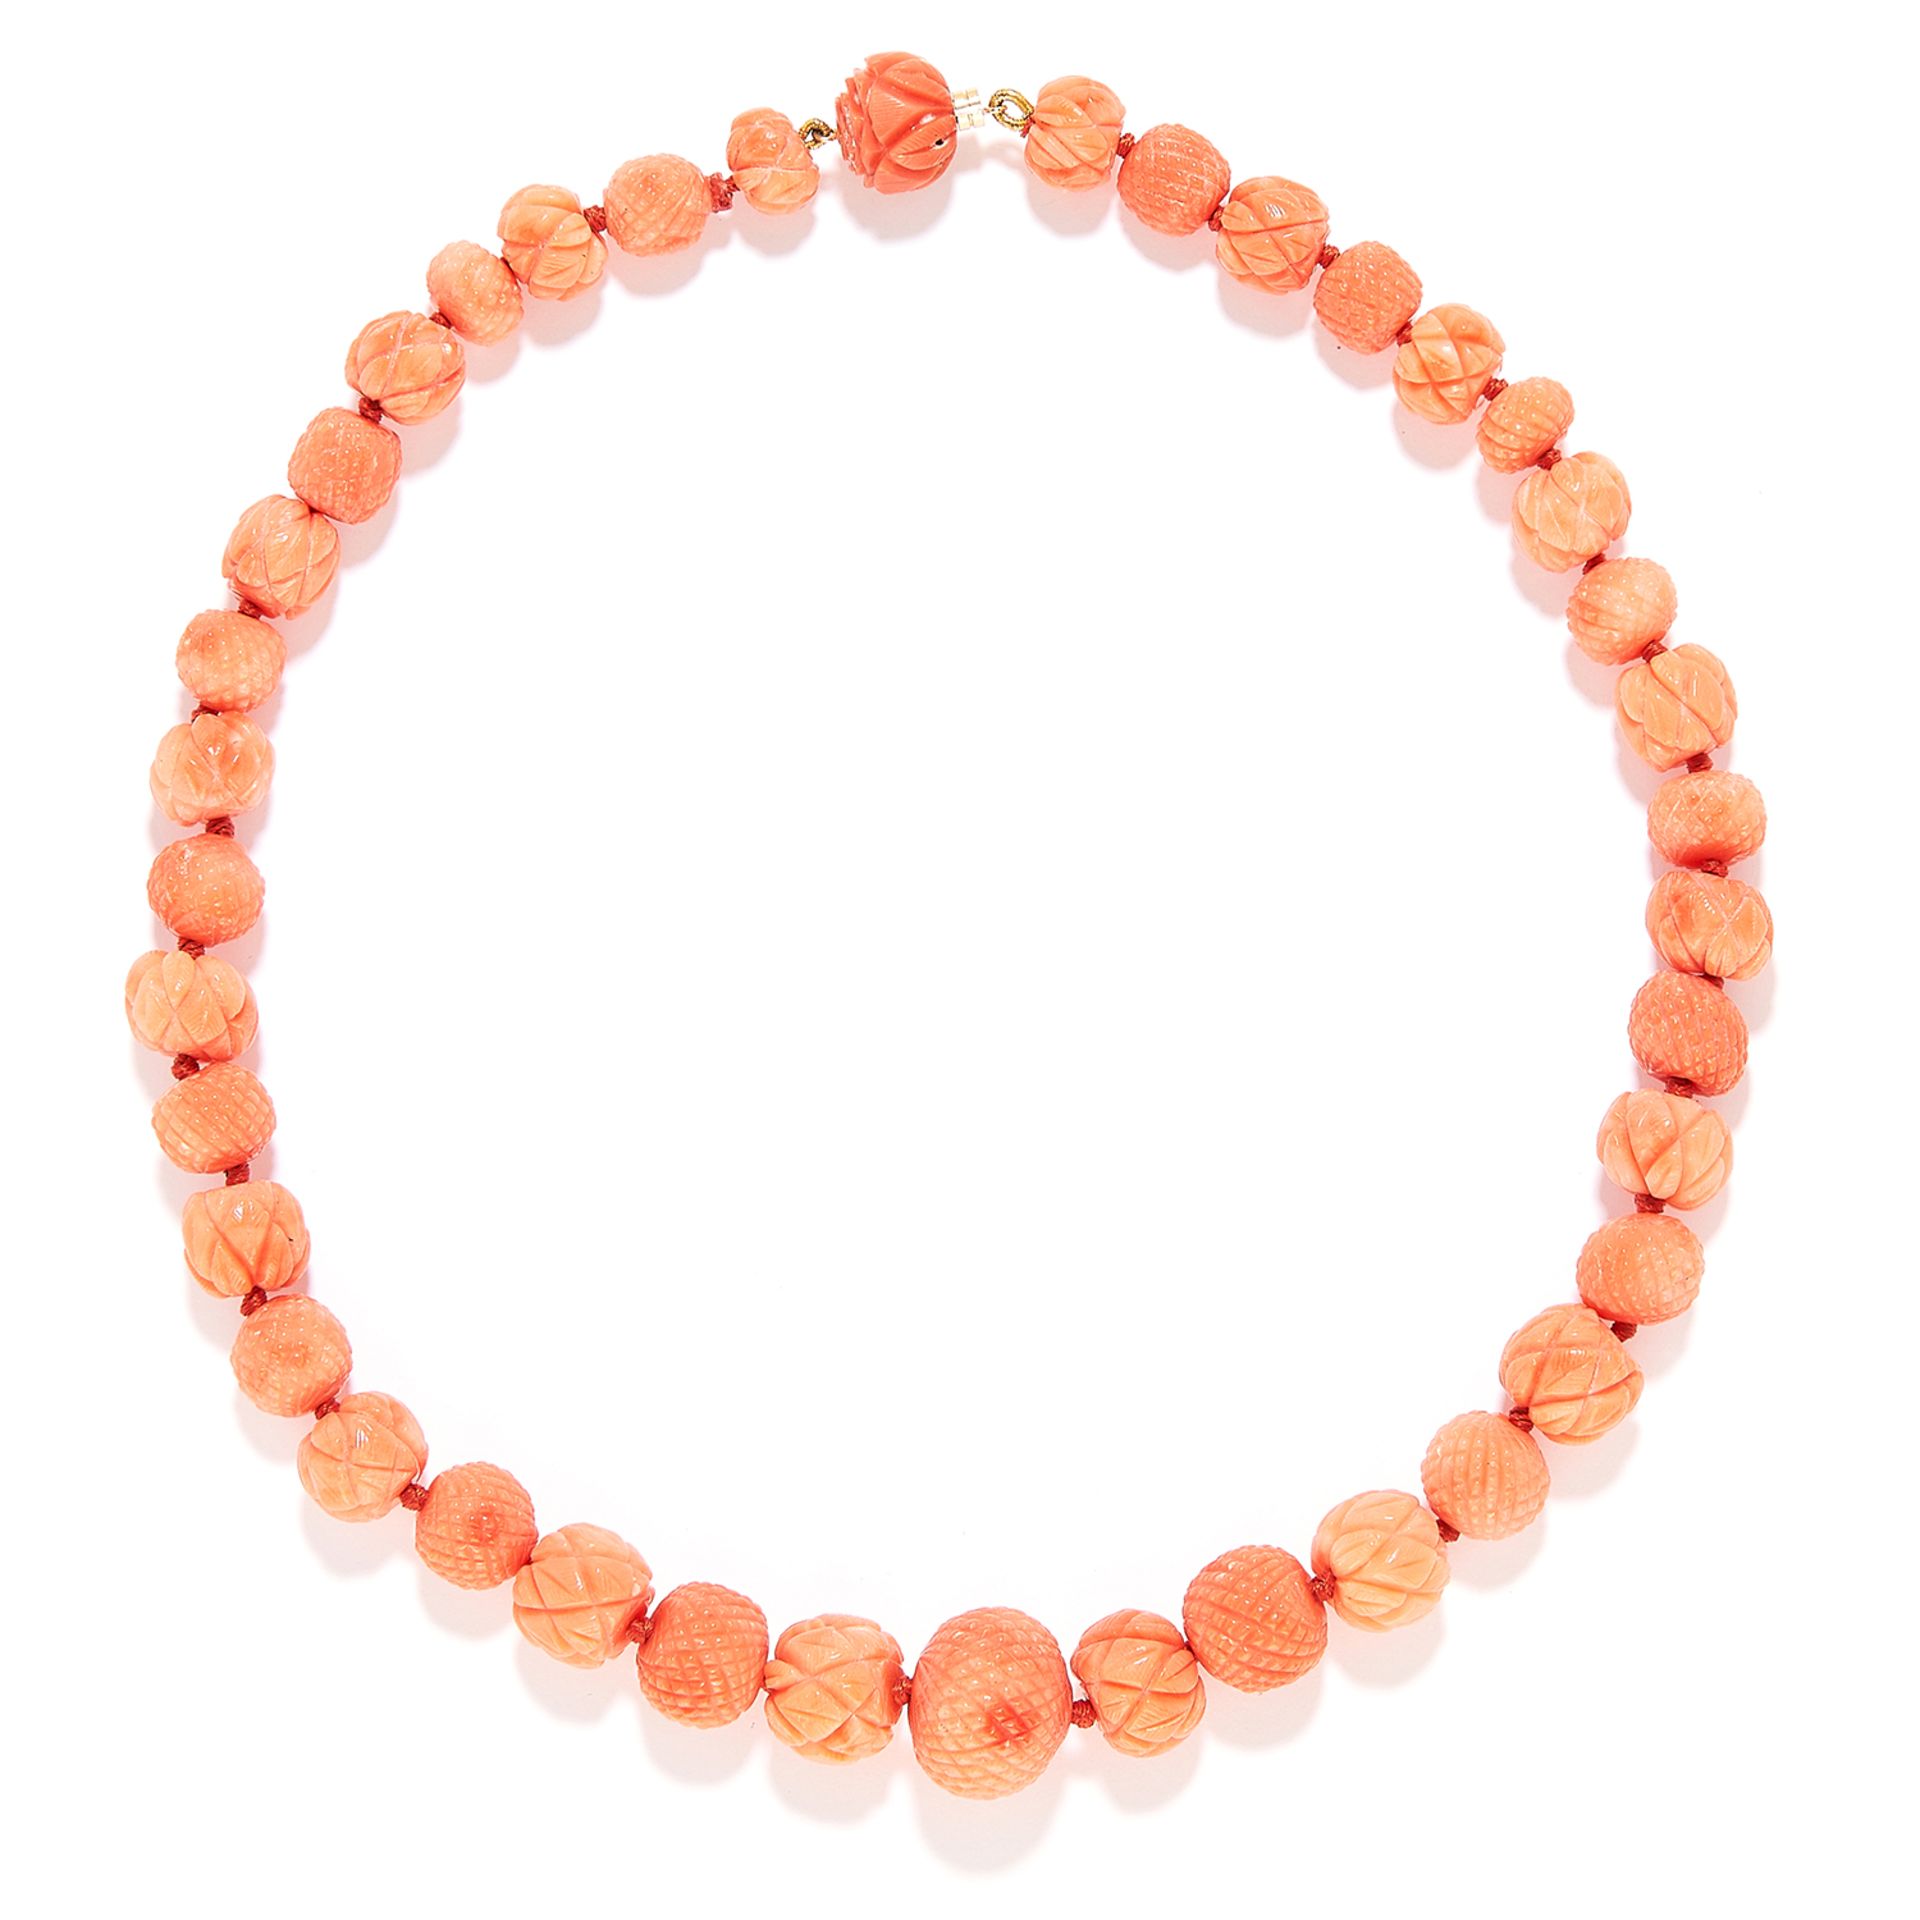 CARVED CORAL BEAD NECKLACE in yellow gold, comprising of a single strand of carved coral beads,